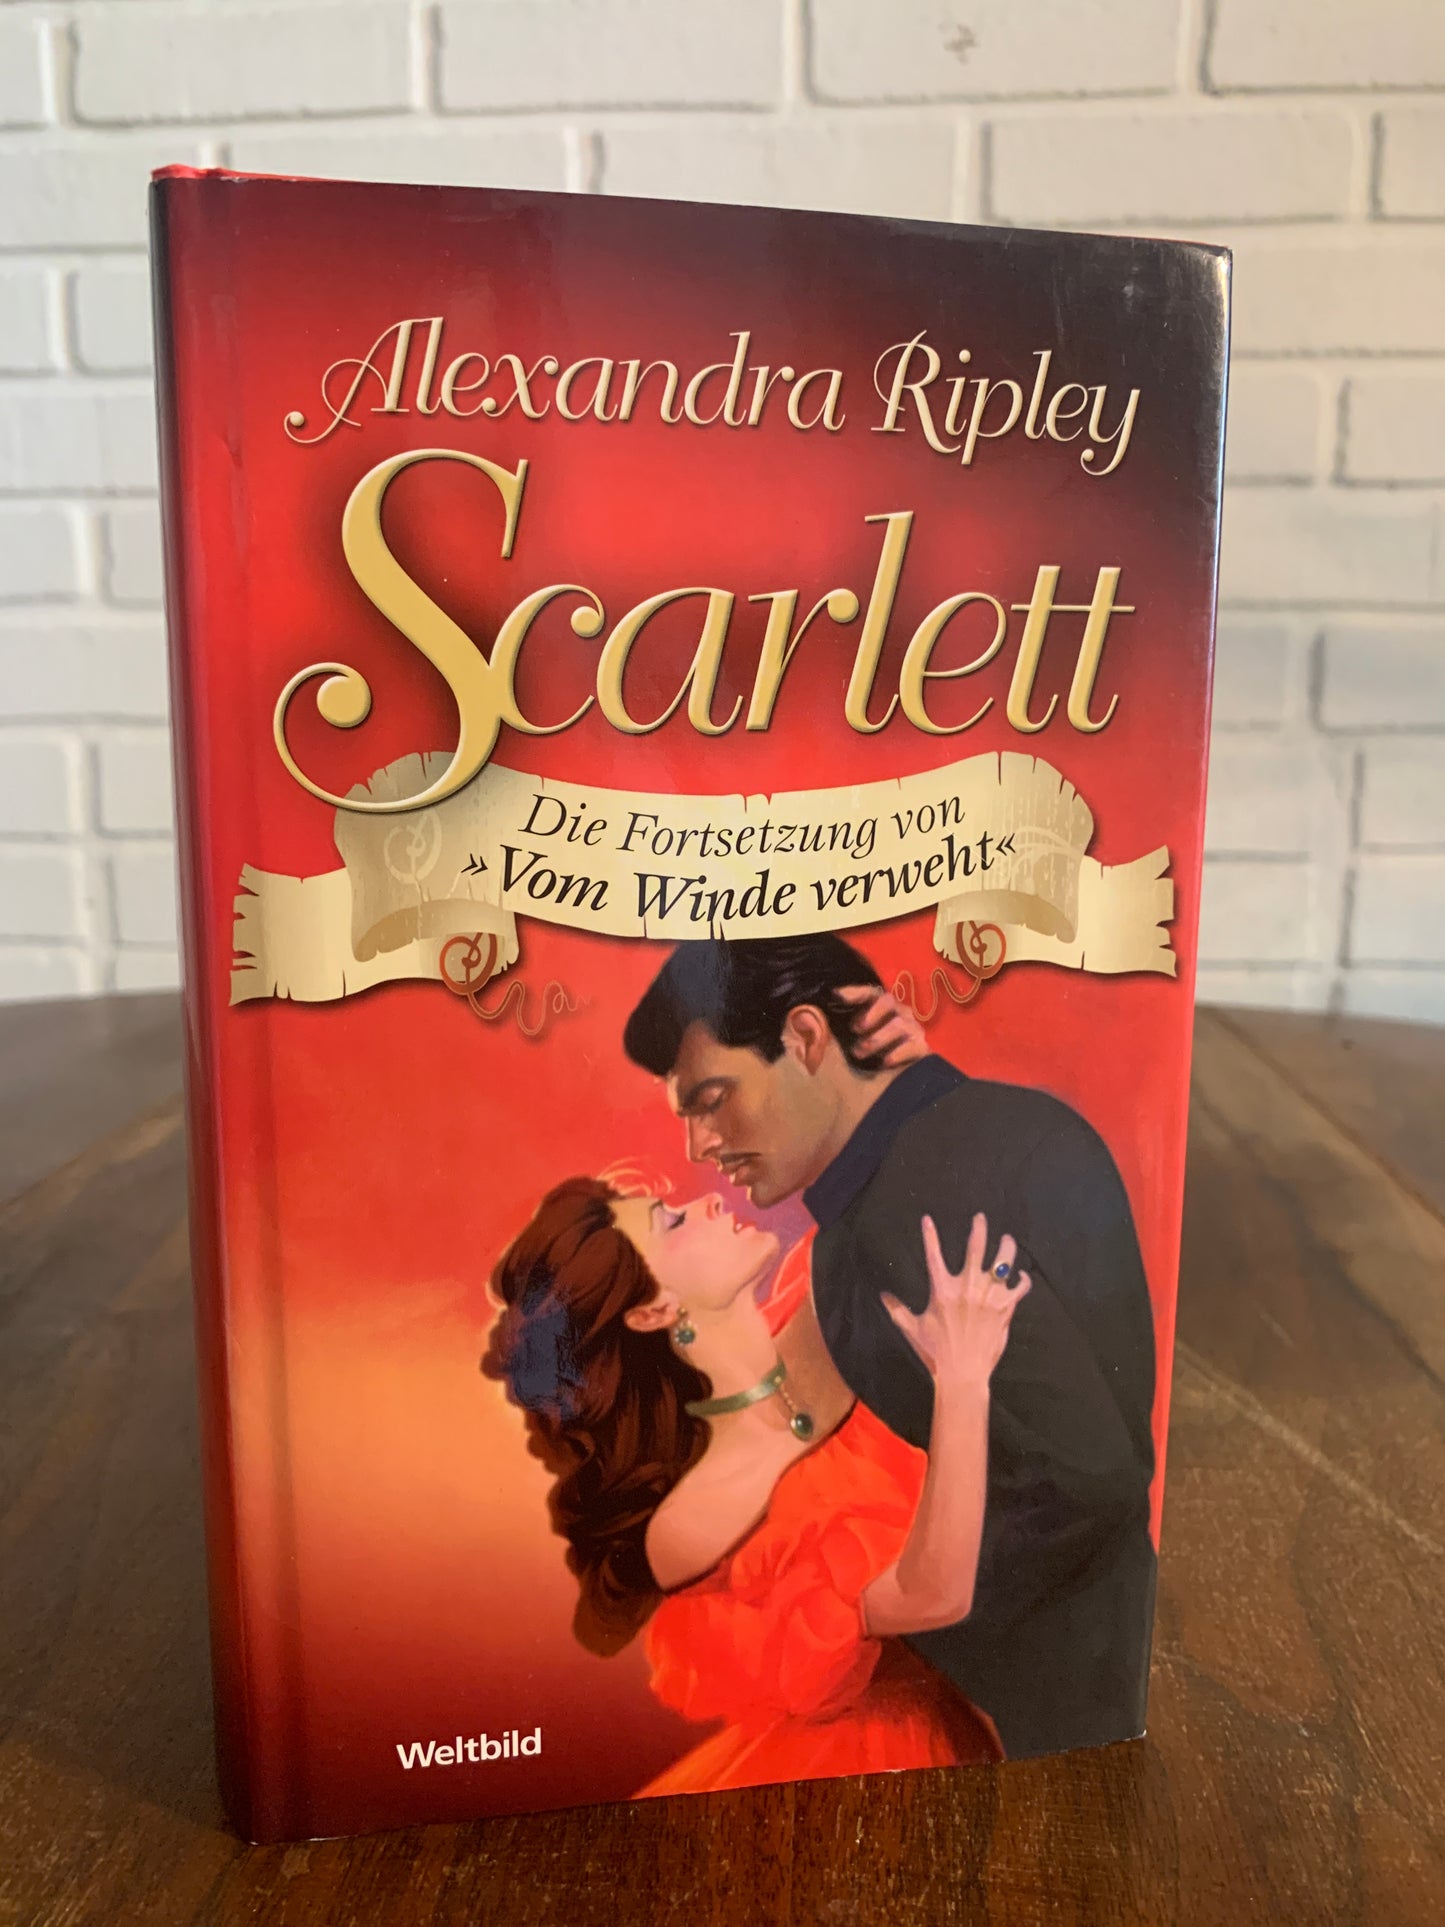 Scarlett by Alexandra Ripley, Sequel to Gone with the Wind (German)